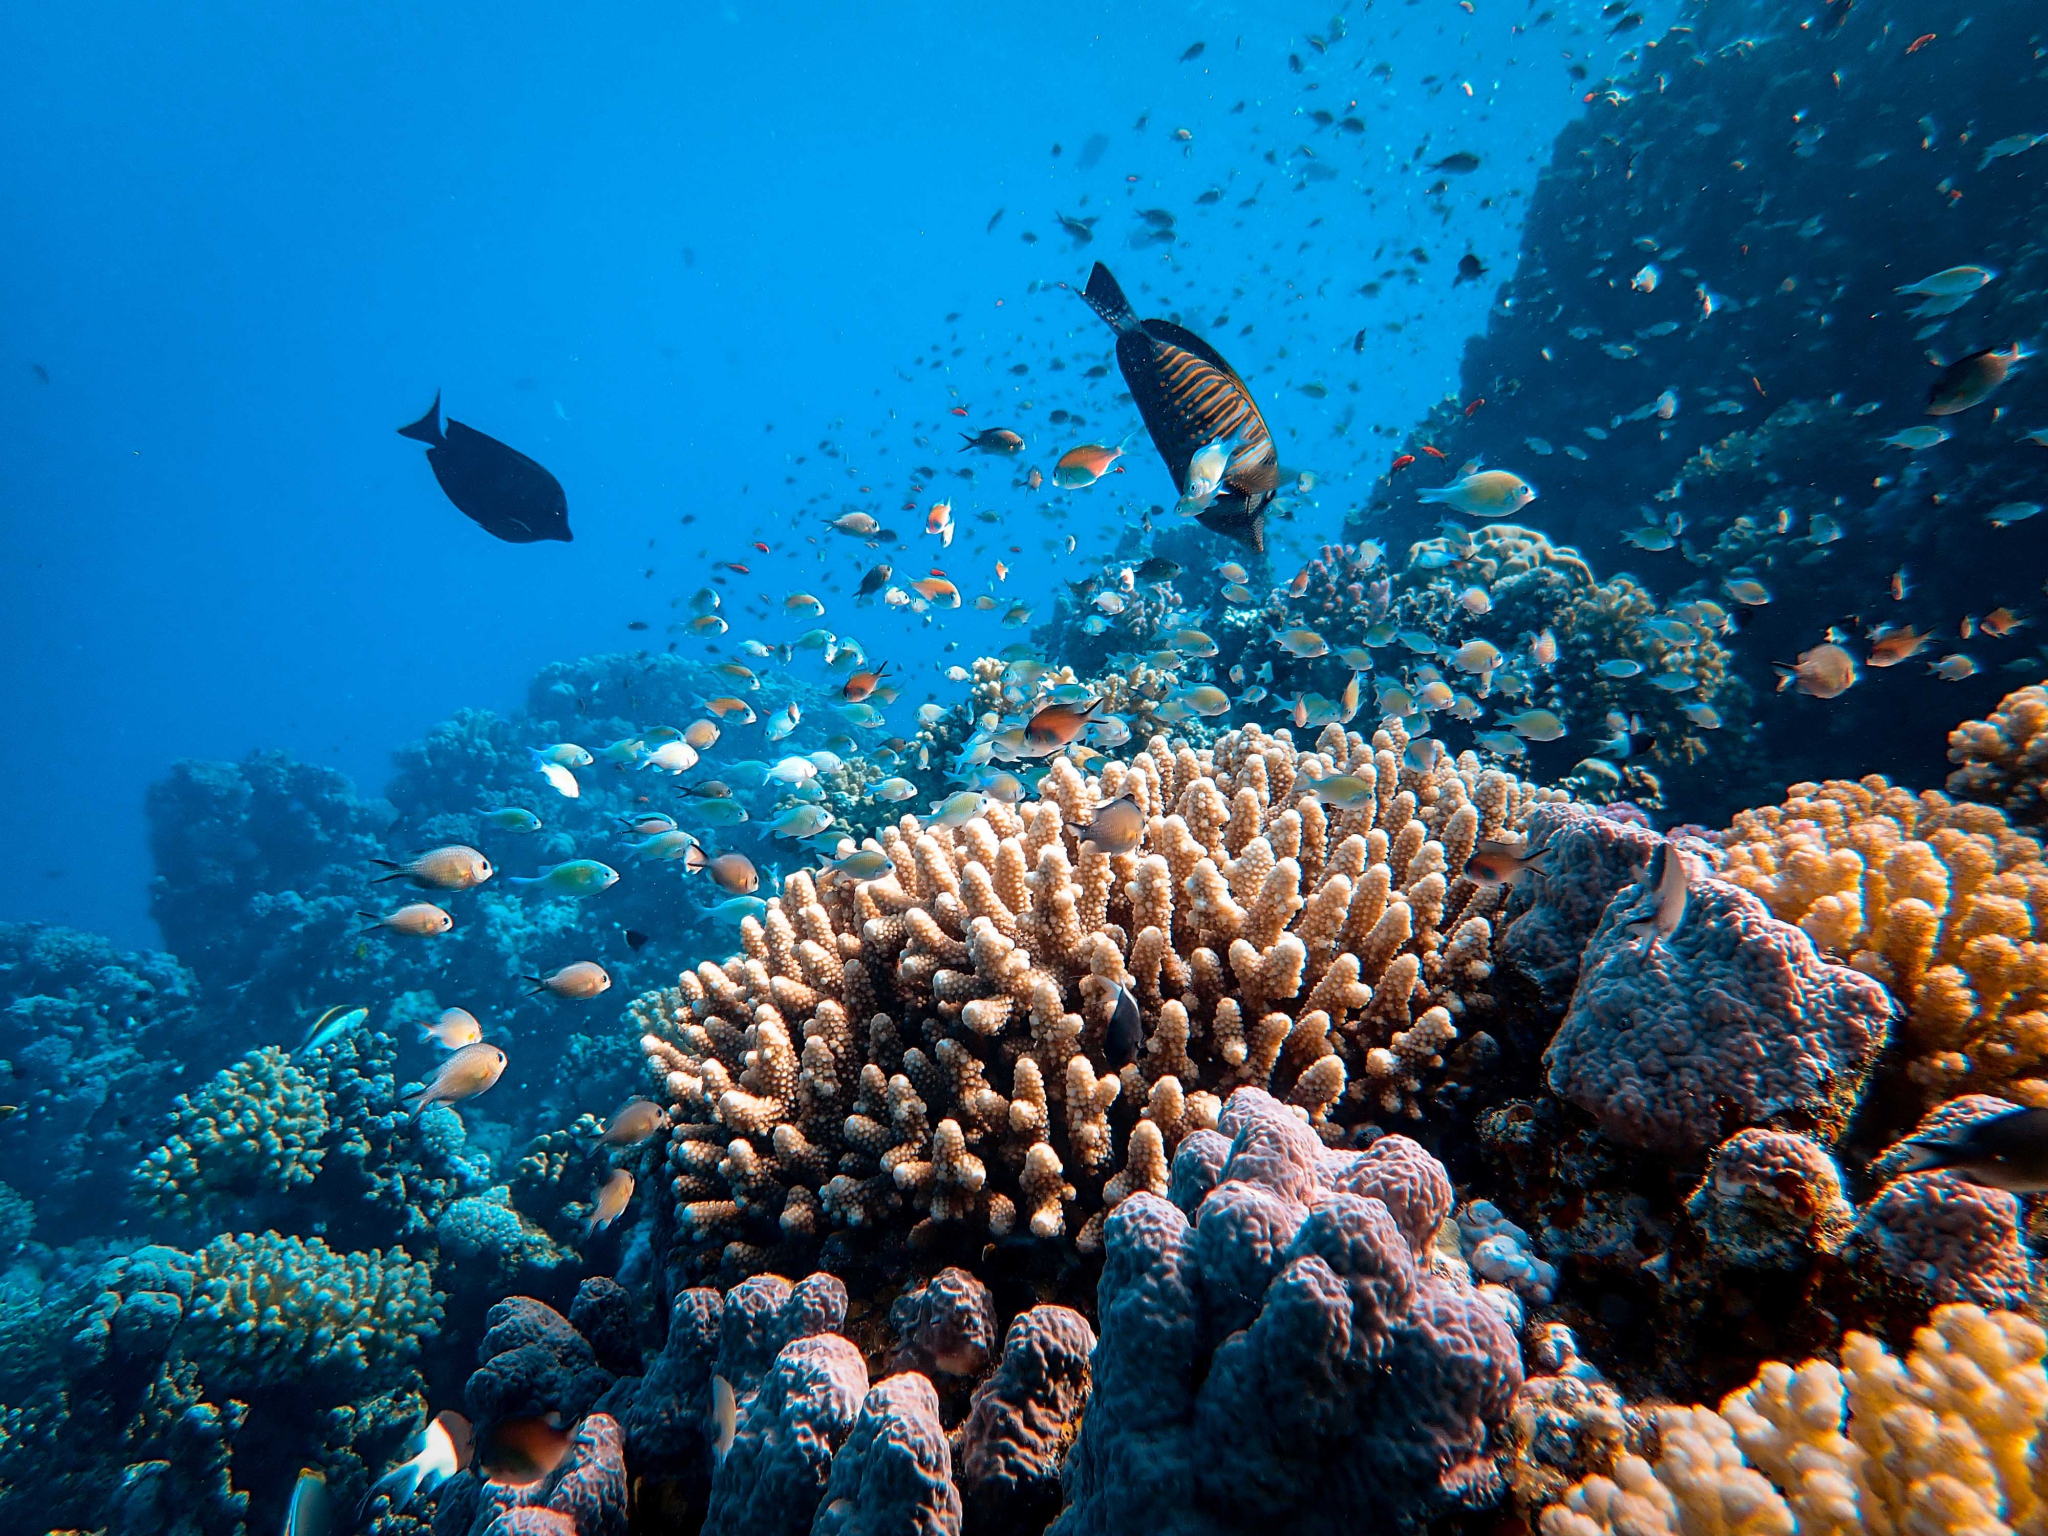 Coral reefs are complex ecosystems. Every component is unique and has its role in the big picture.